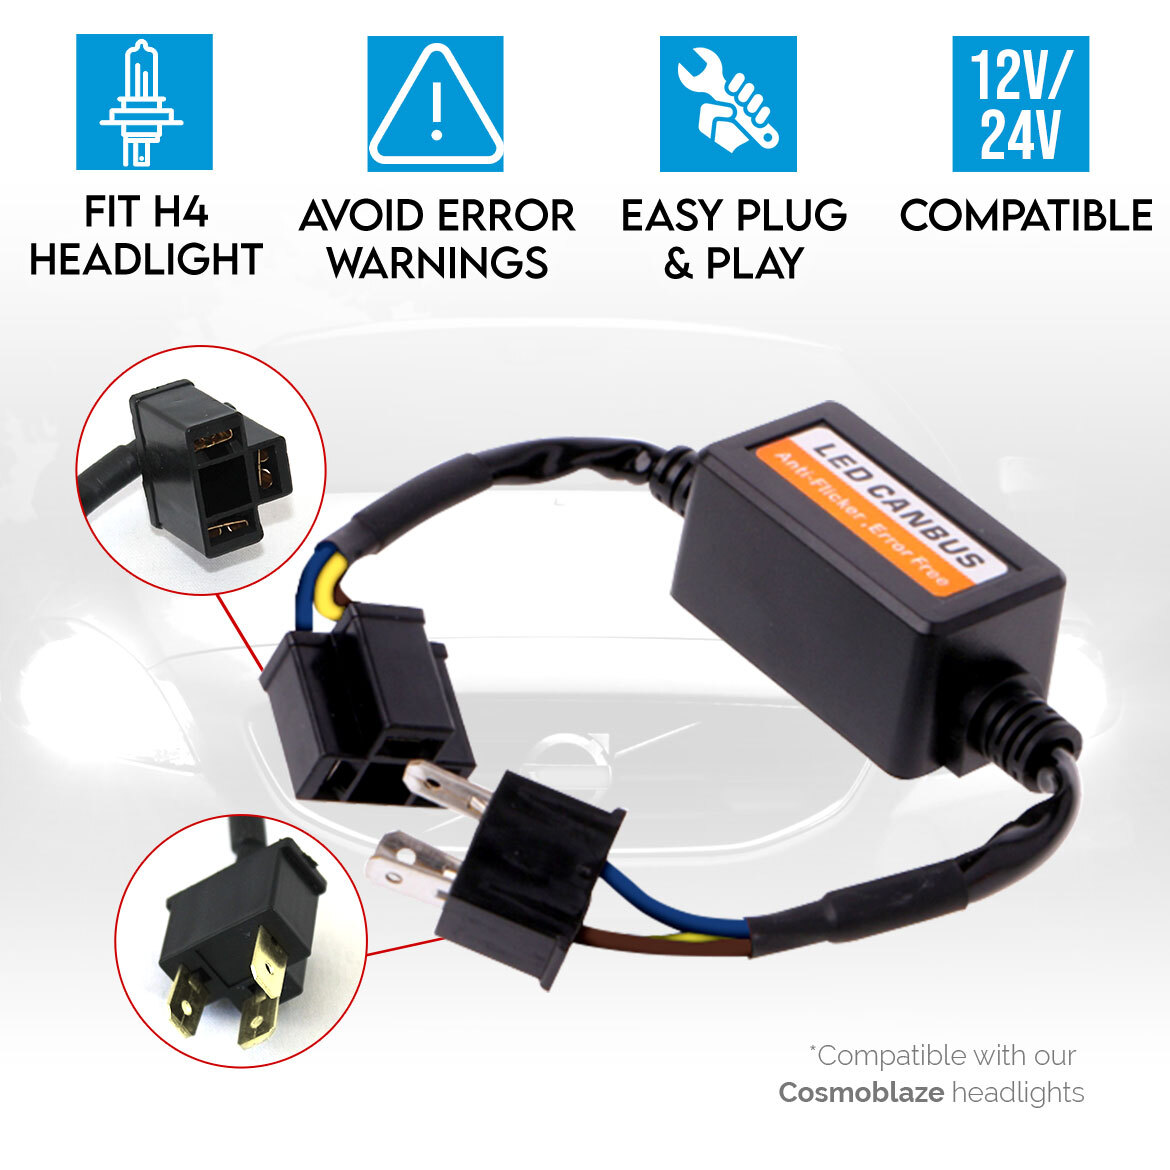 Buy LED Conversion Kit Decoders Includes Two LED Cancelers – HID